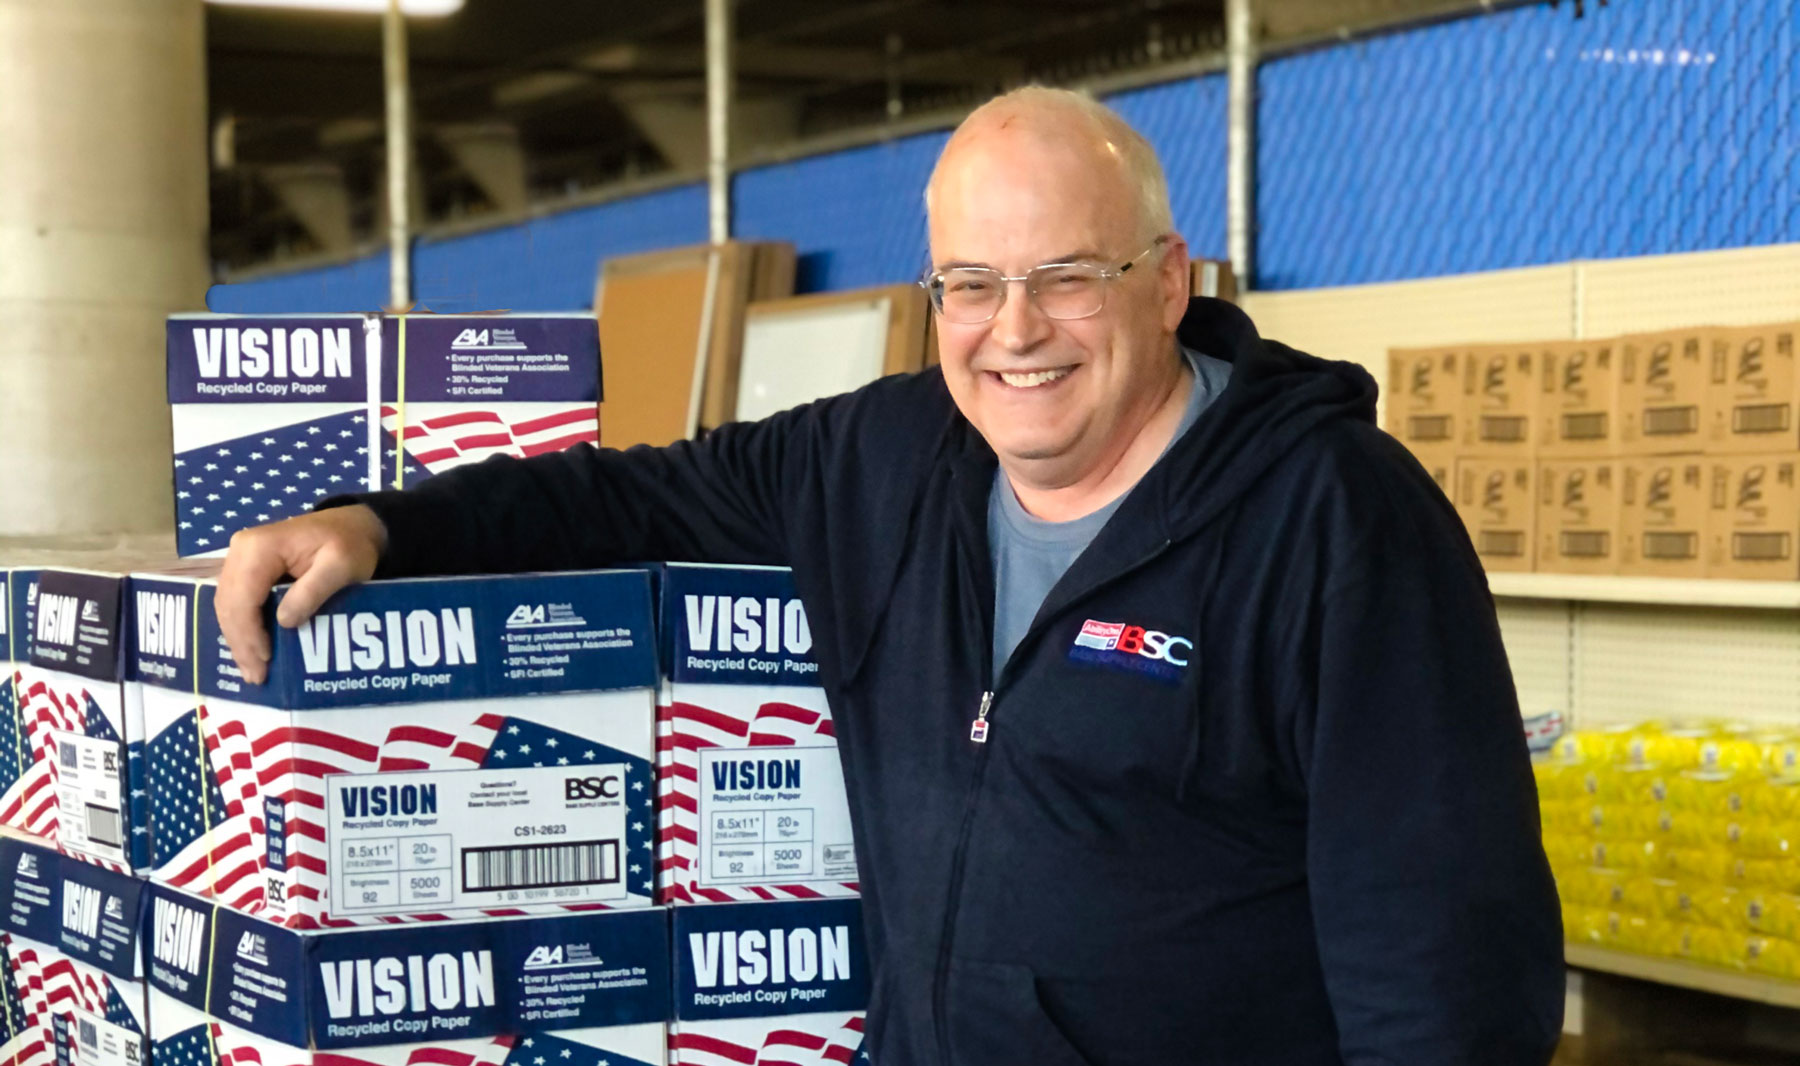 Image Description: A middle aged white man leans on a tower of stacked boxes, smiling. He is wearing glasses and a dark blue sweatshirt with an embroidered BSC logo.